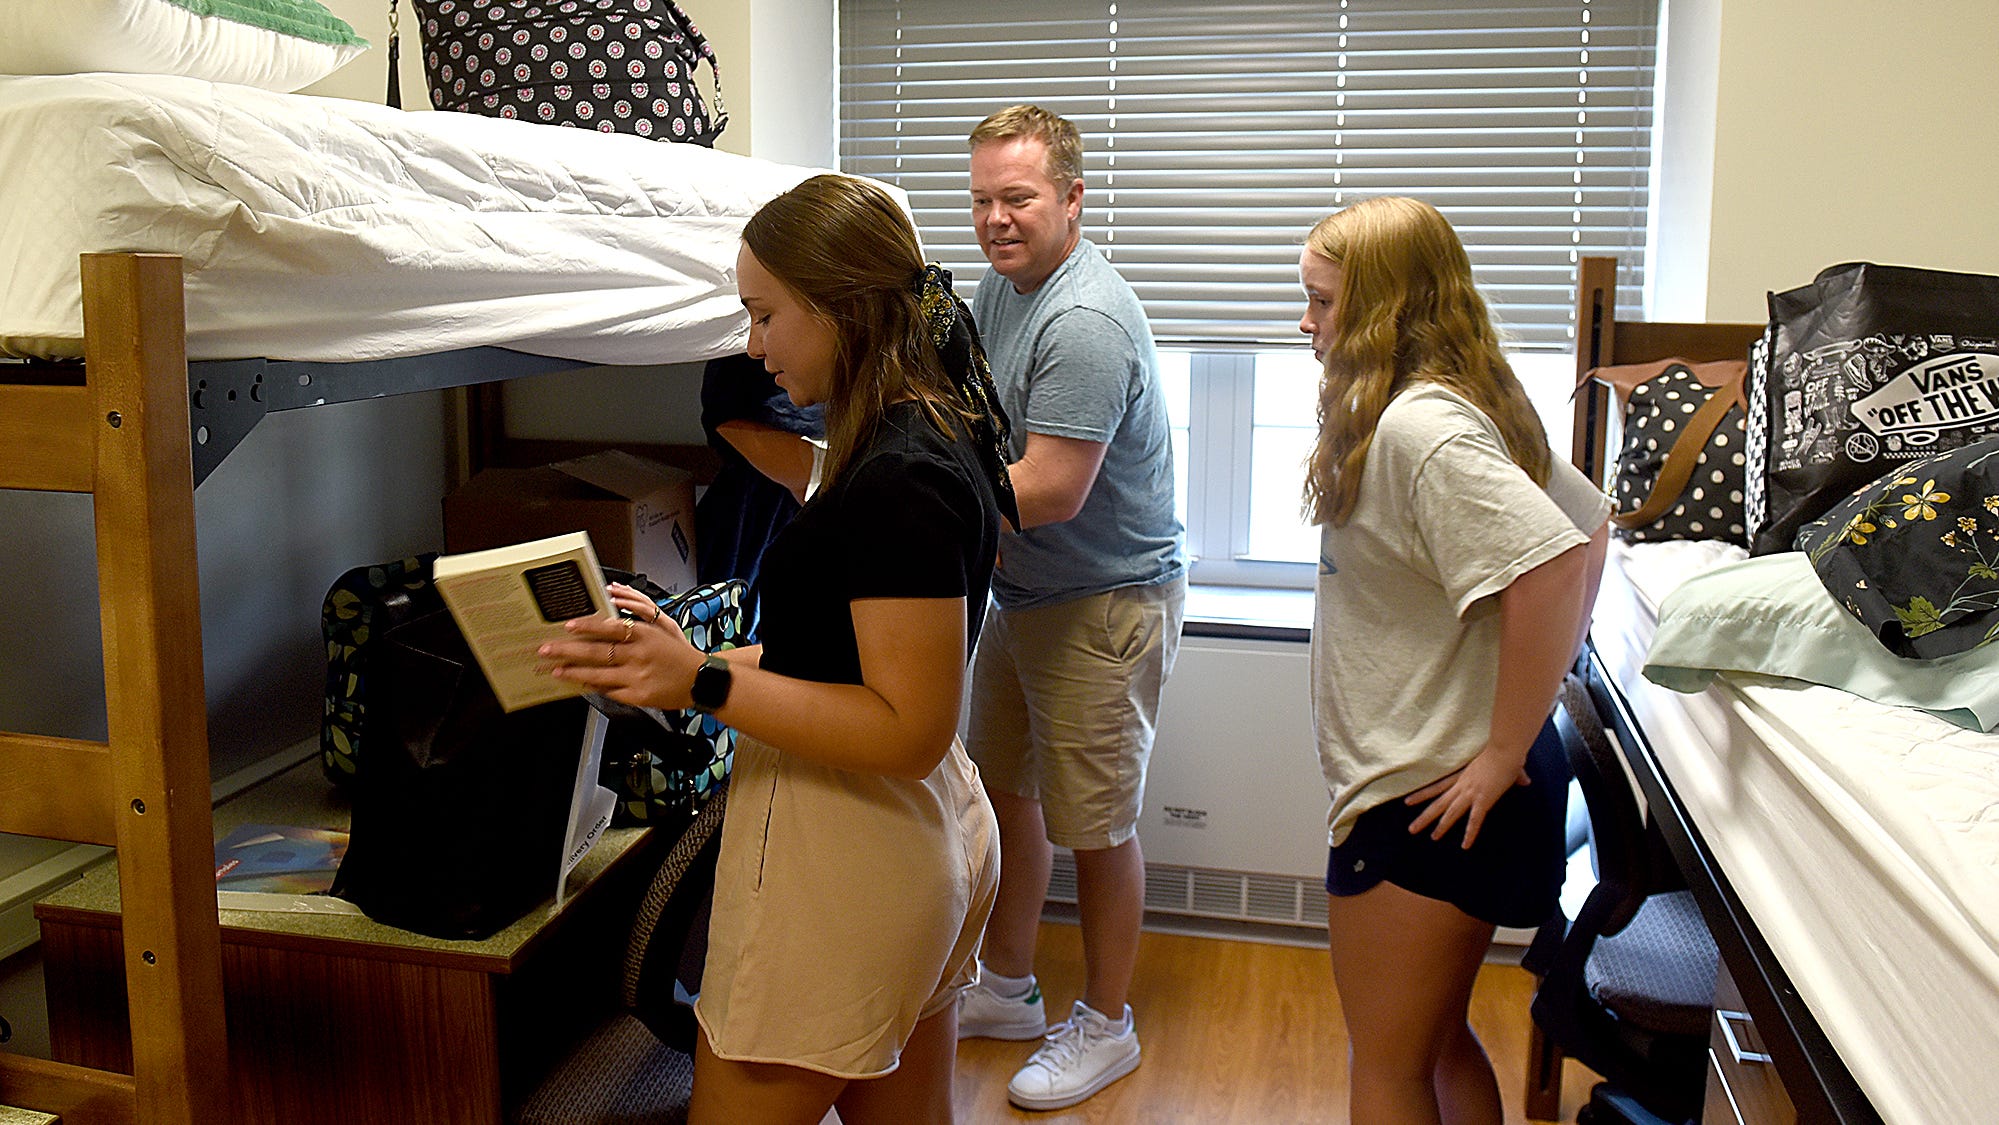 University of Missouri students move-in day for student dorms